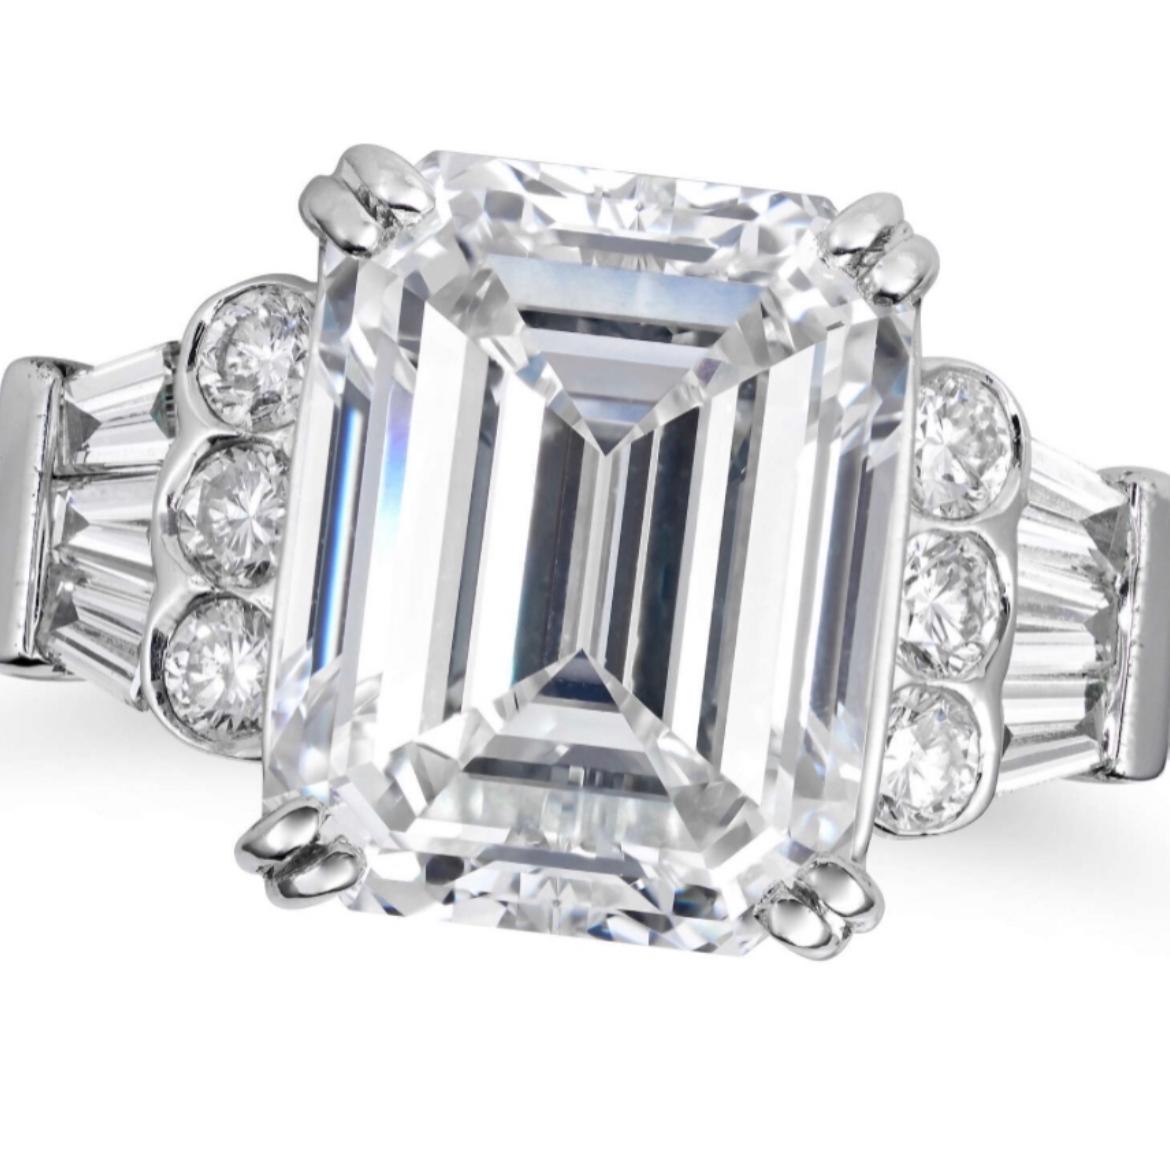 5.15 Carat GIA Emerald Cut Diamond H VVS2 In Excellent Condition For Sale In Glasgow, GB